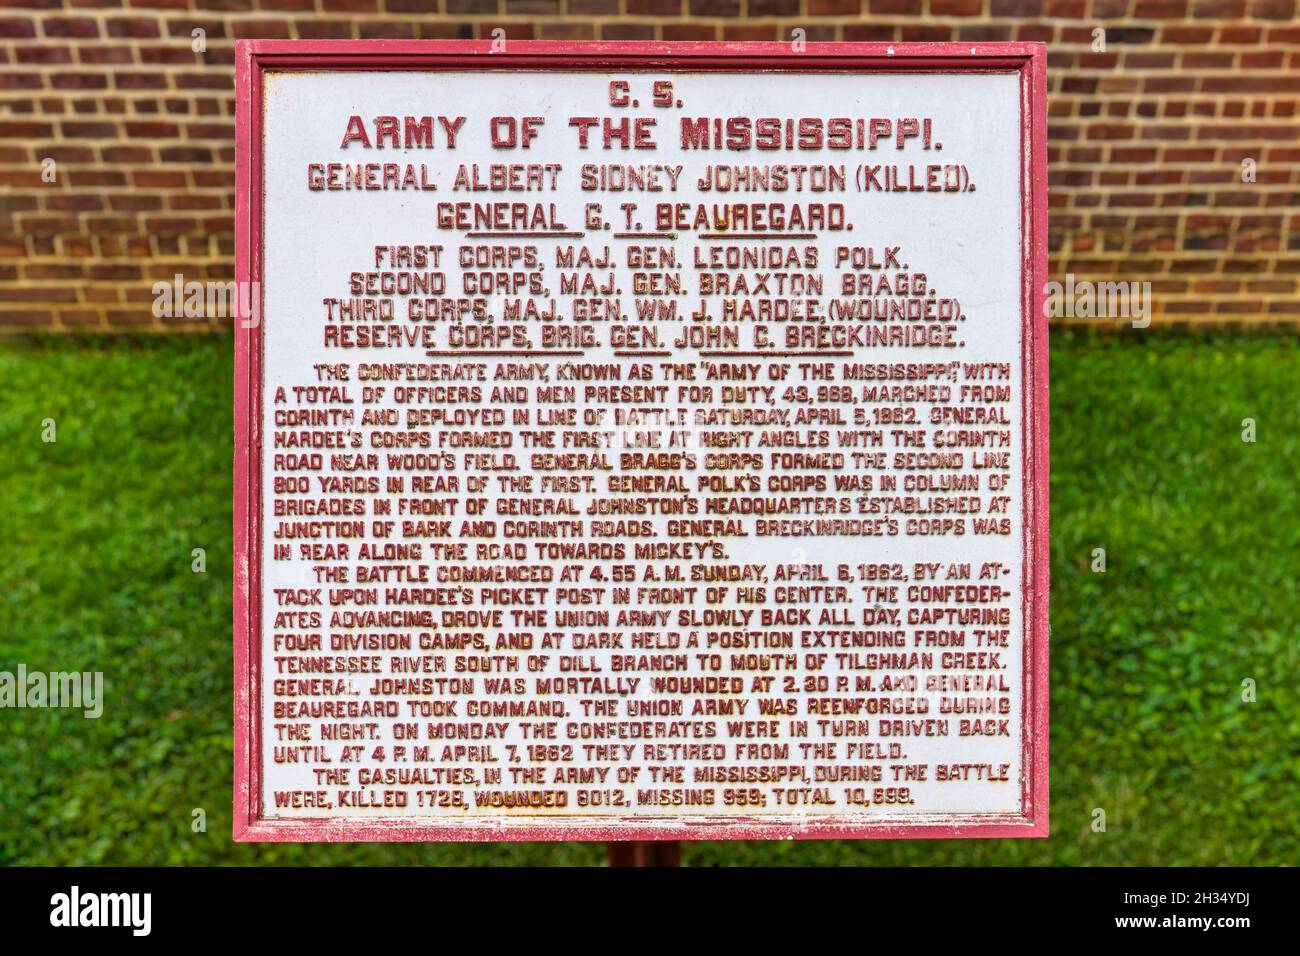 The Confederate Army of the Mississippi historic marker outside the Visitor Center at the Shiloh National Military Park in Tennessee. Stock Photo